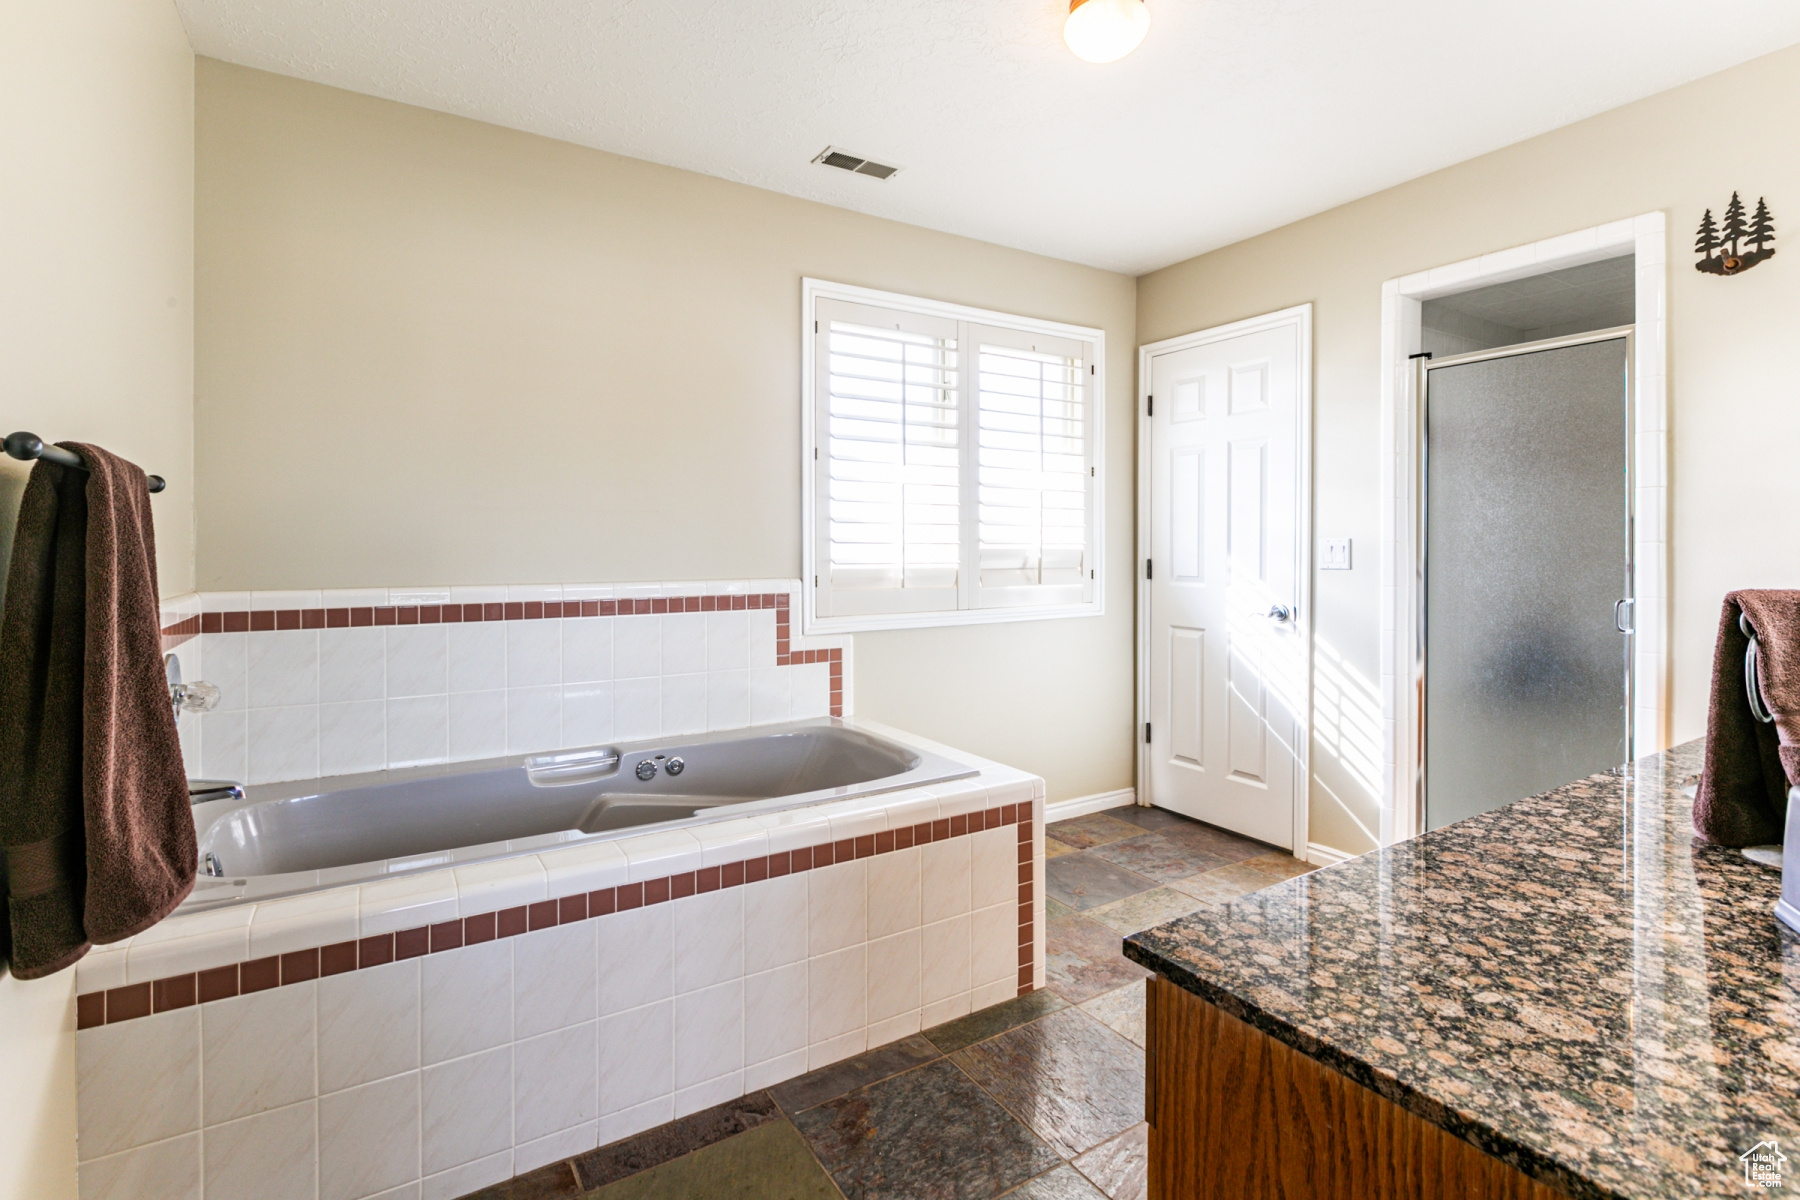 Bathroom featuring shower with separate bathtub, tile flooring, and vanity